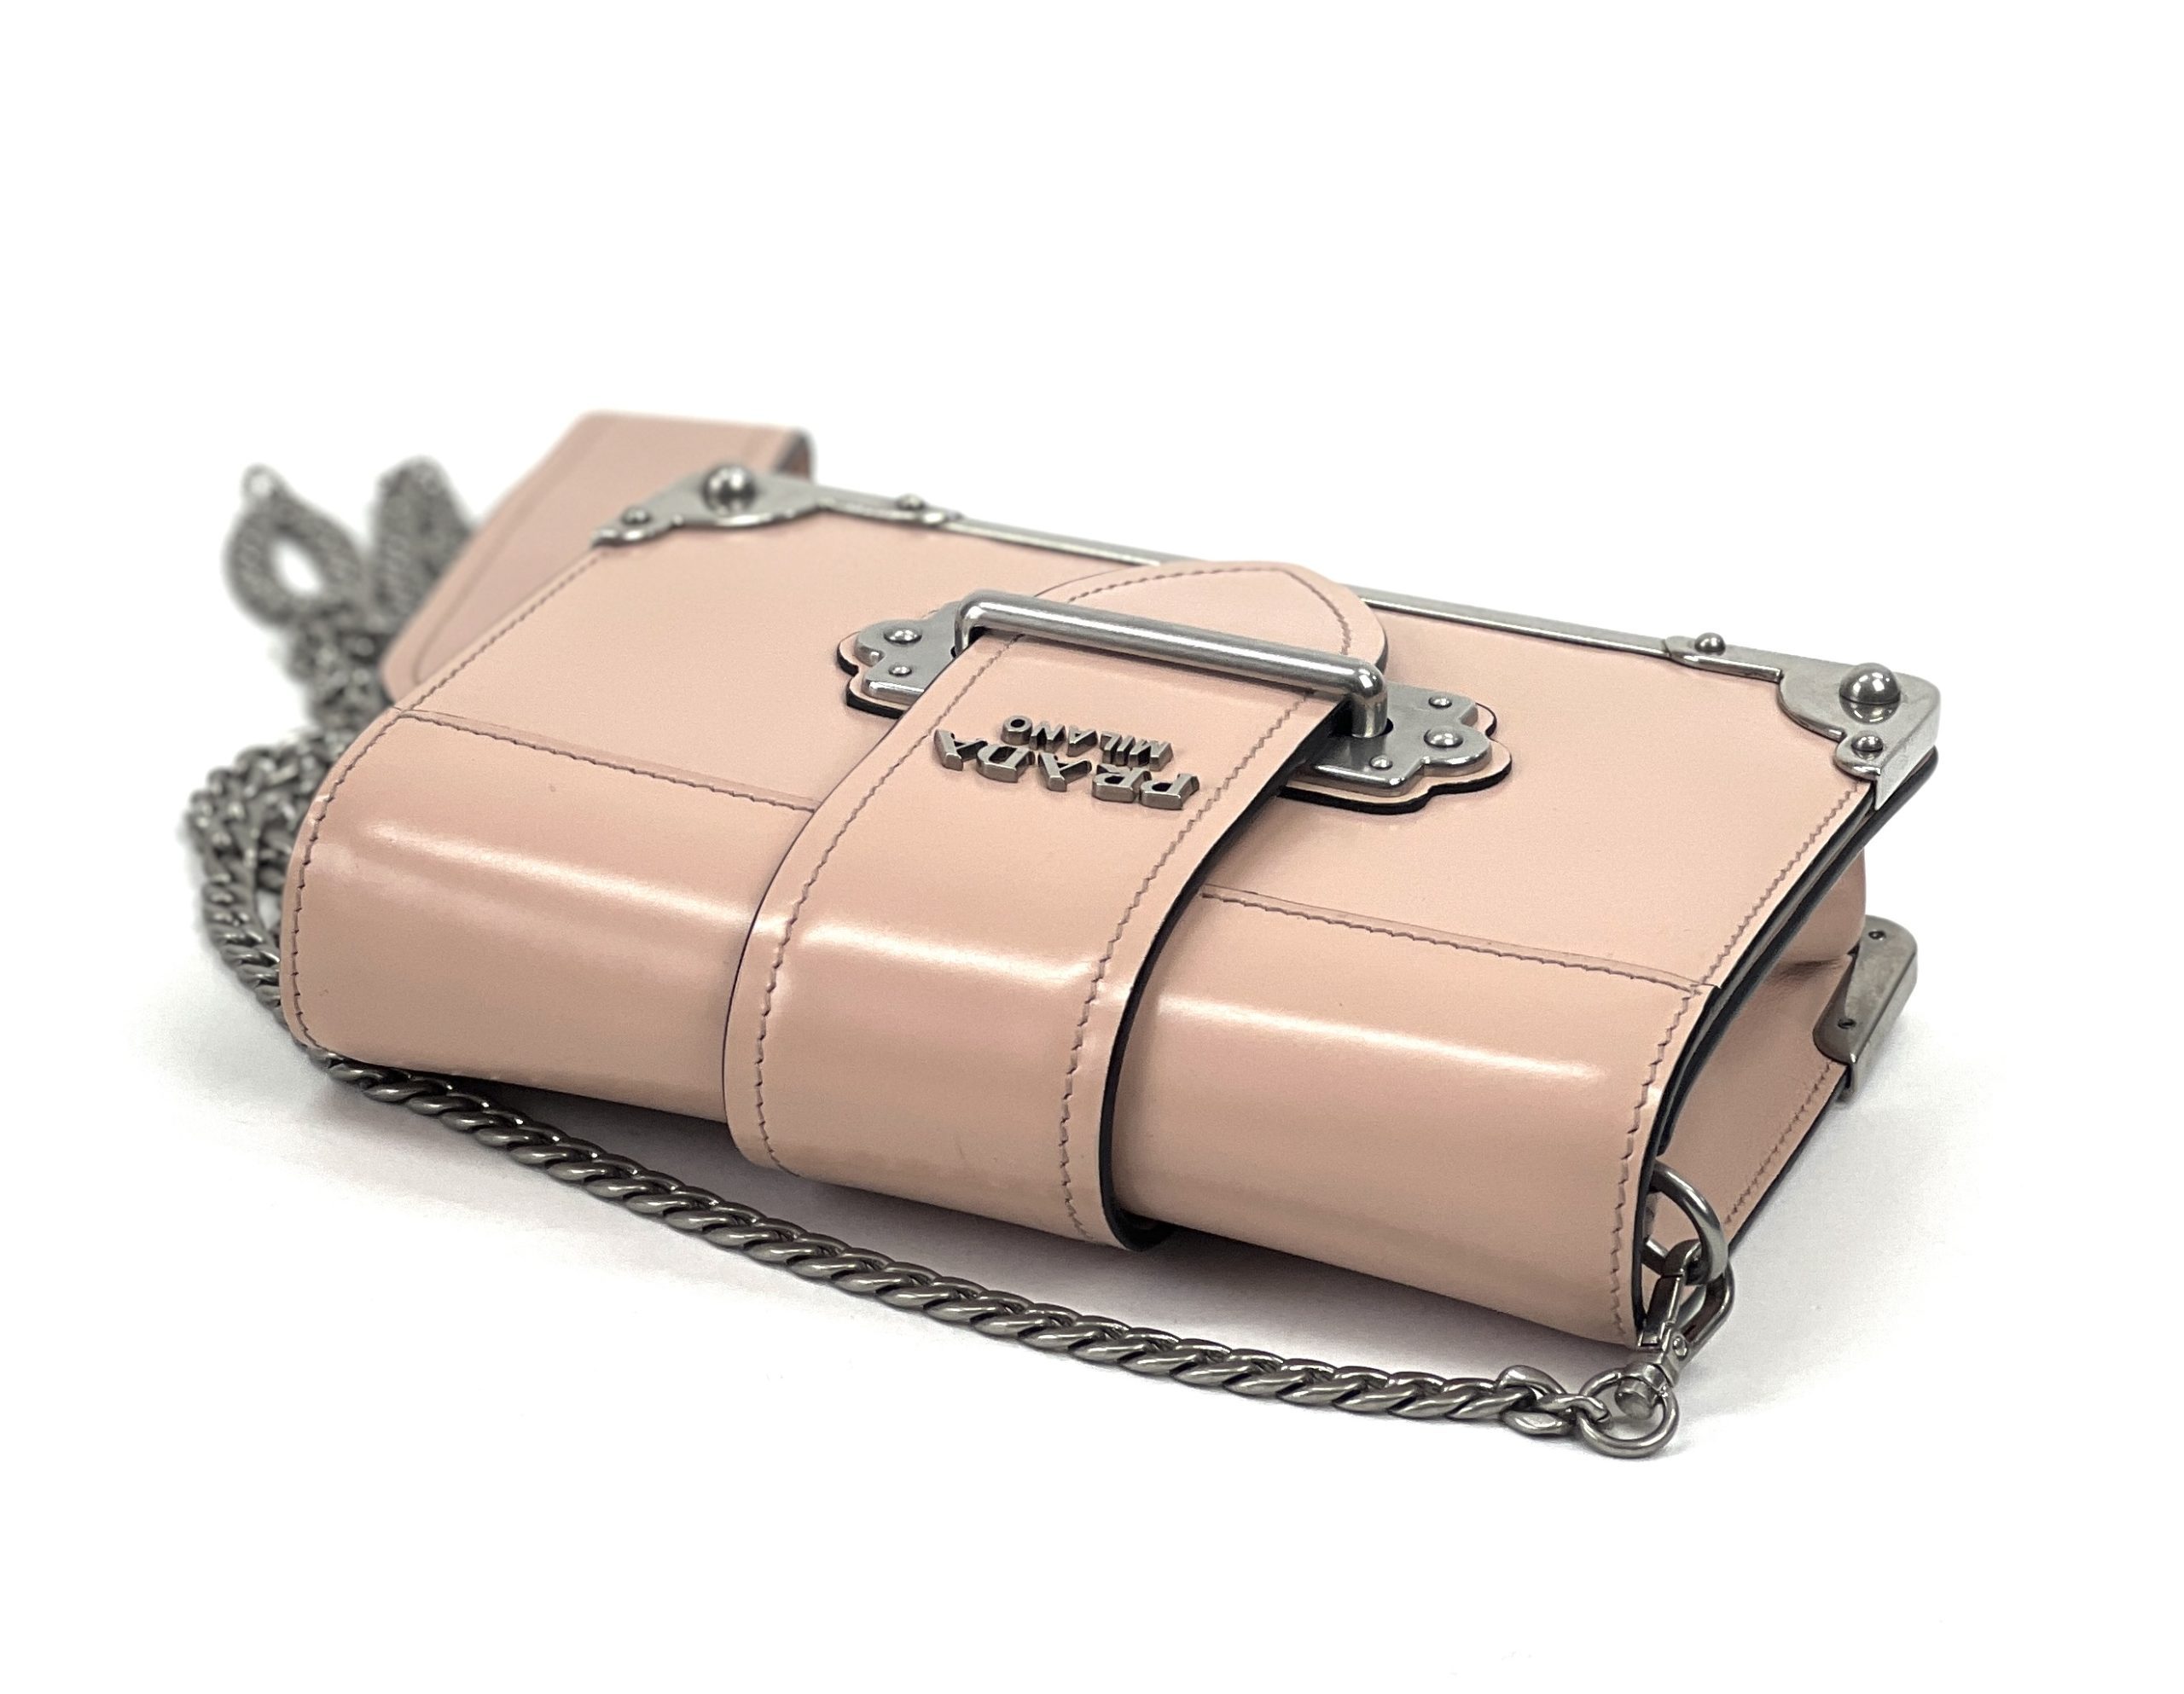 Cahier leather crossbody bag Prada Pink in Leather - 28613887